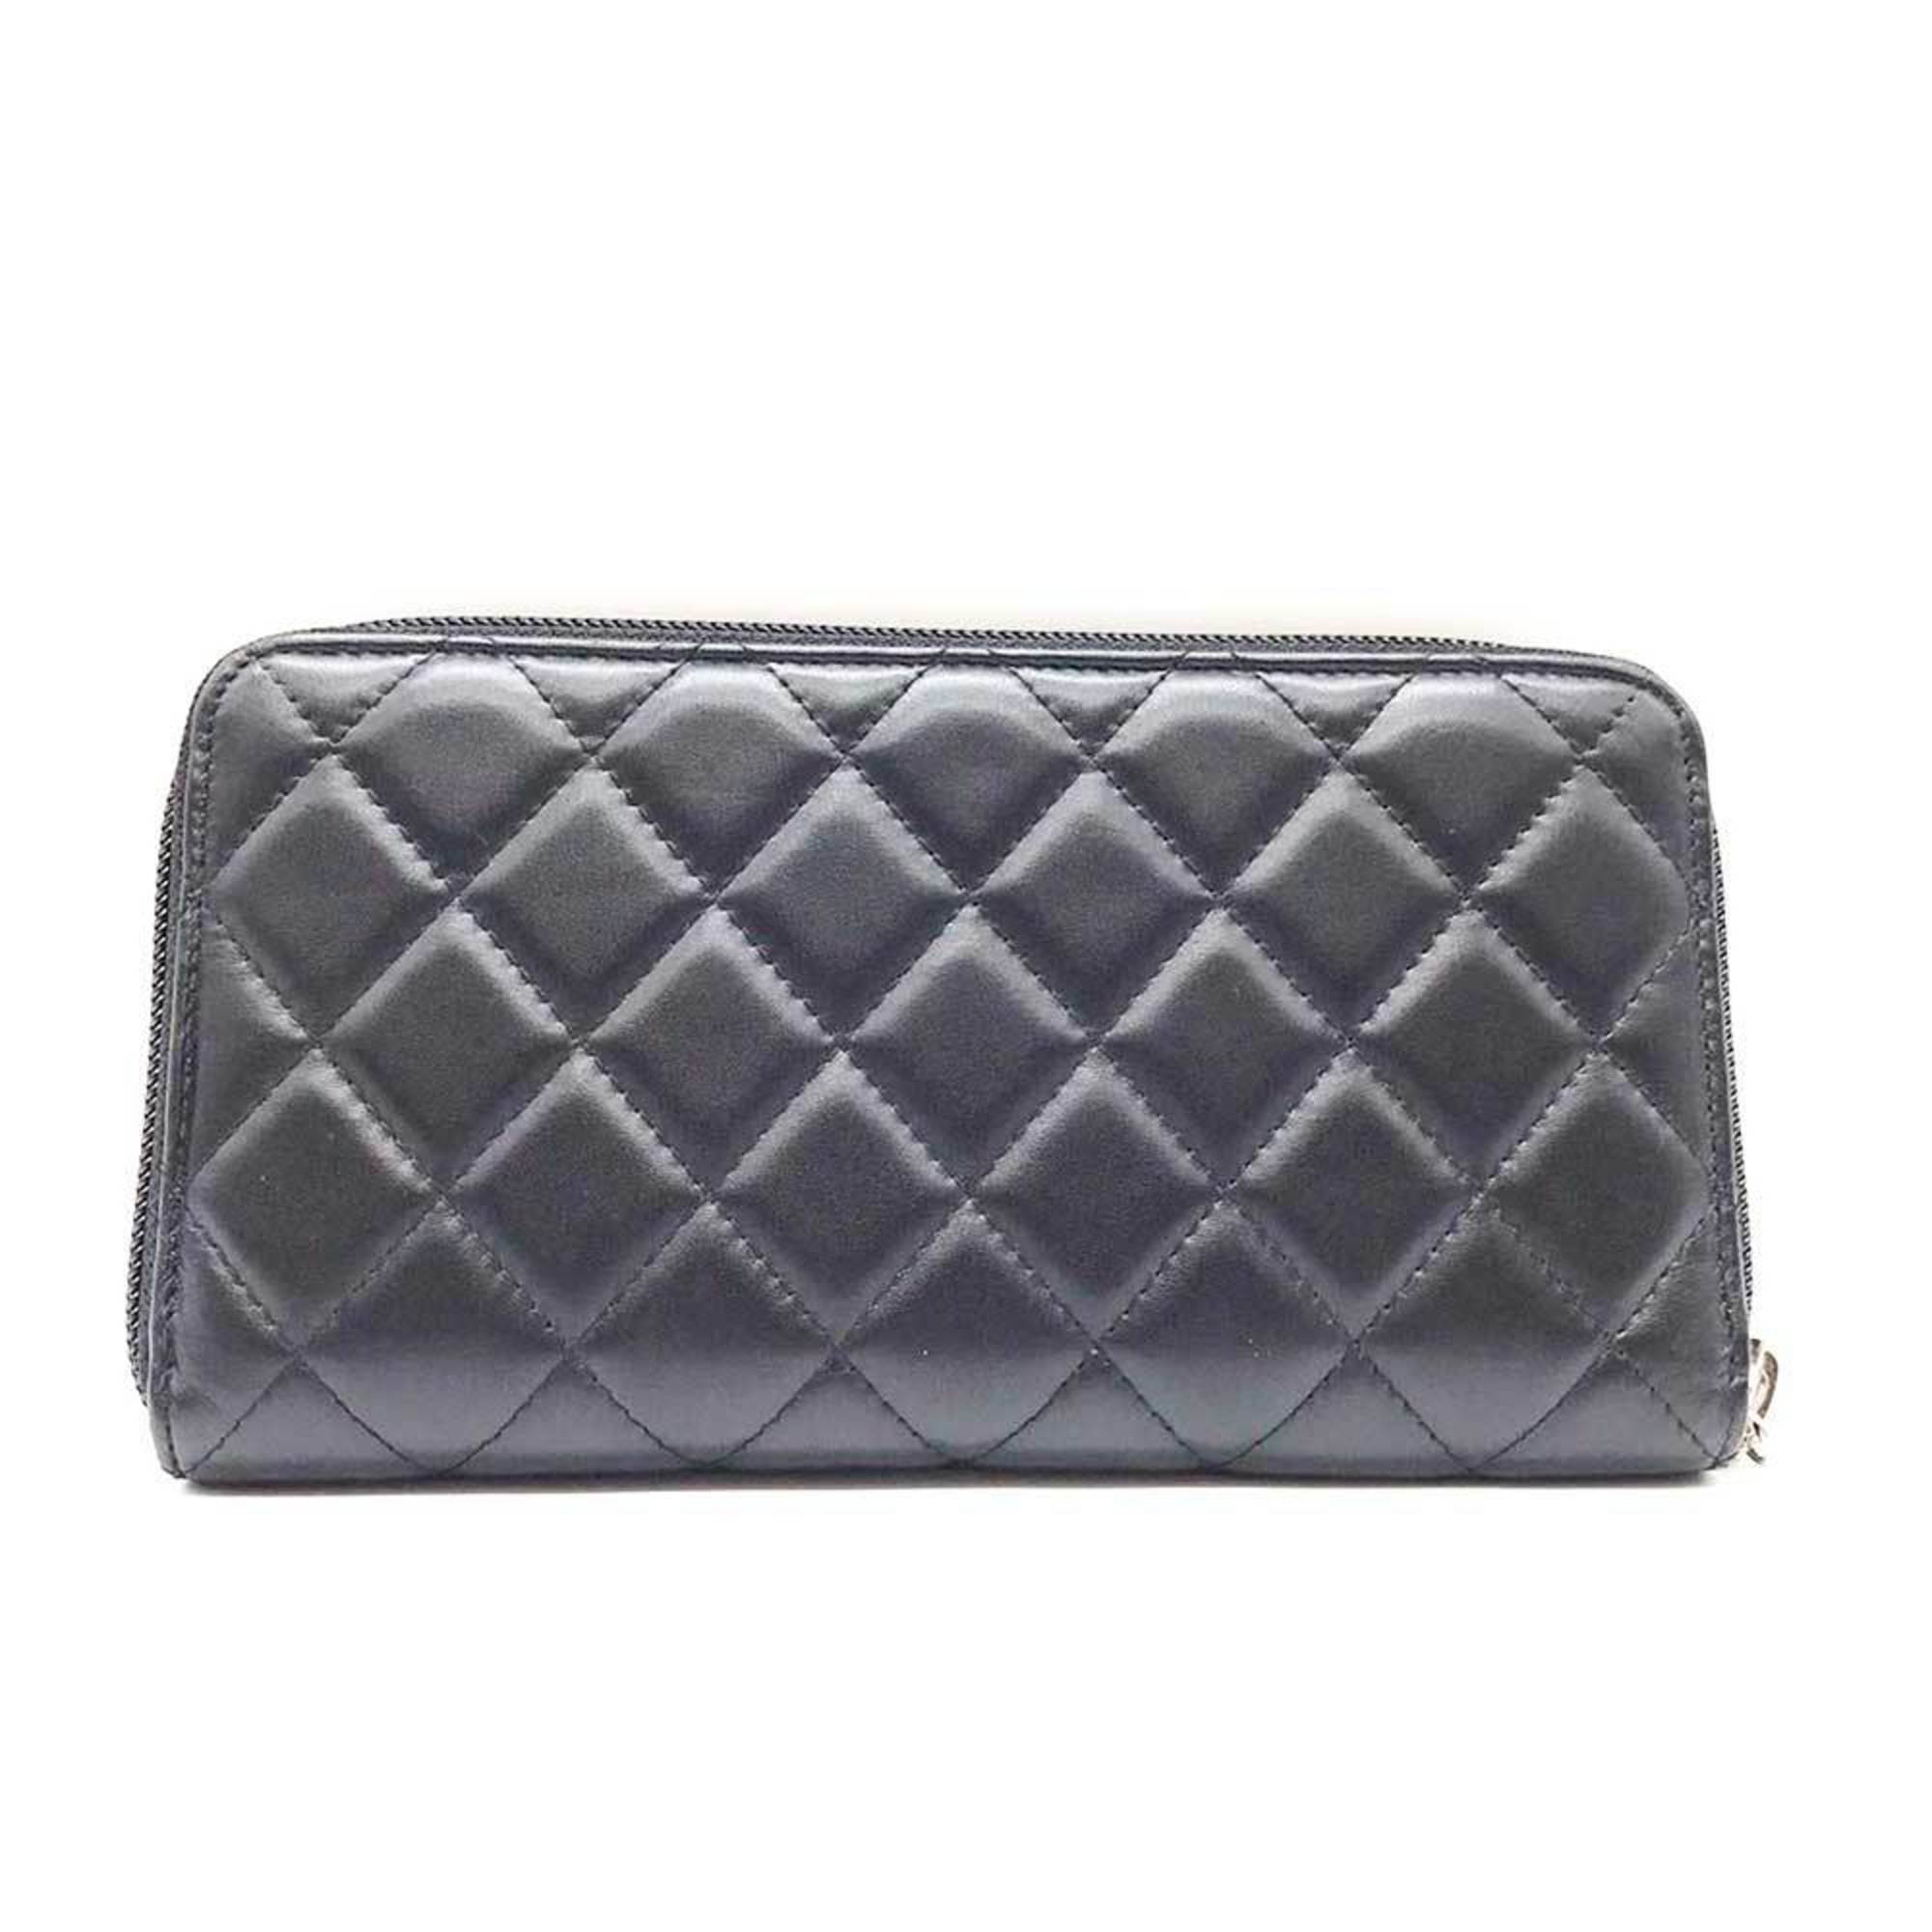 CHANEL Round Wallet Cambon Line Leather Black